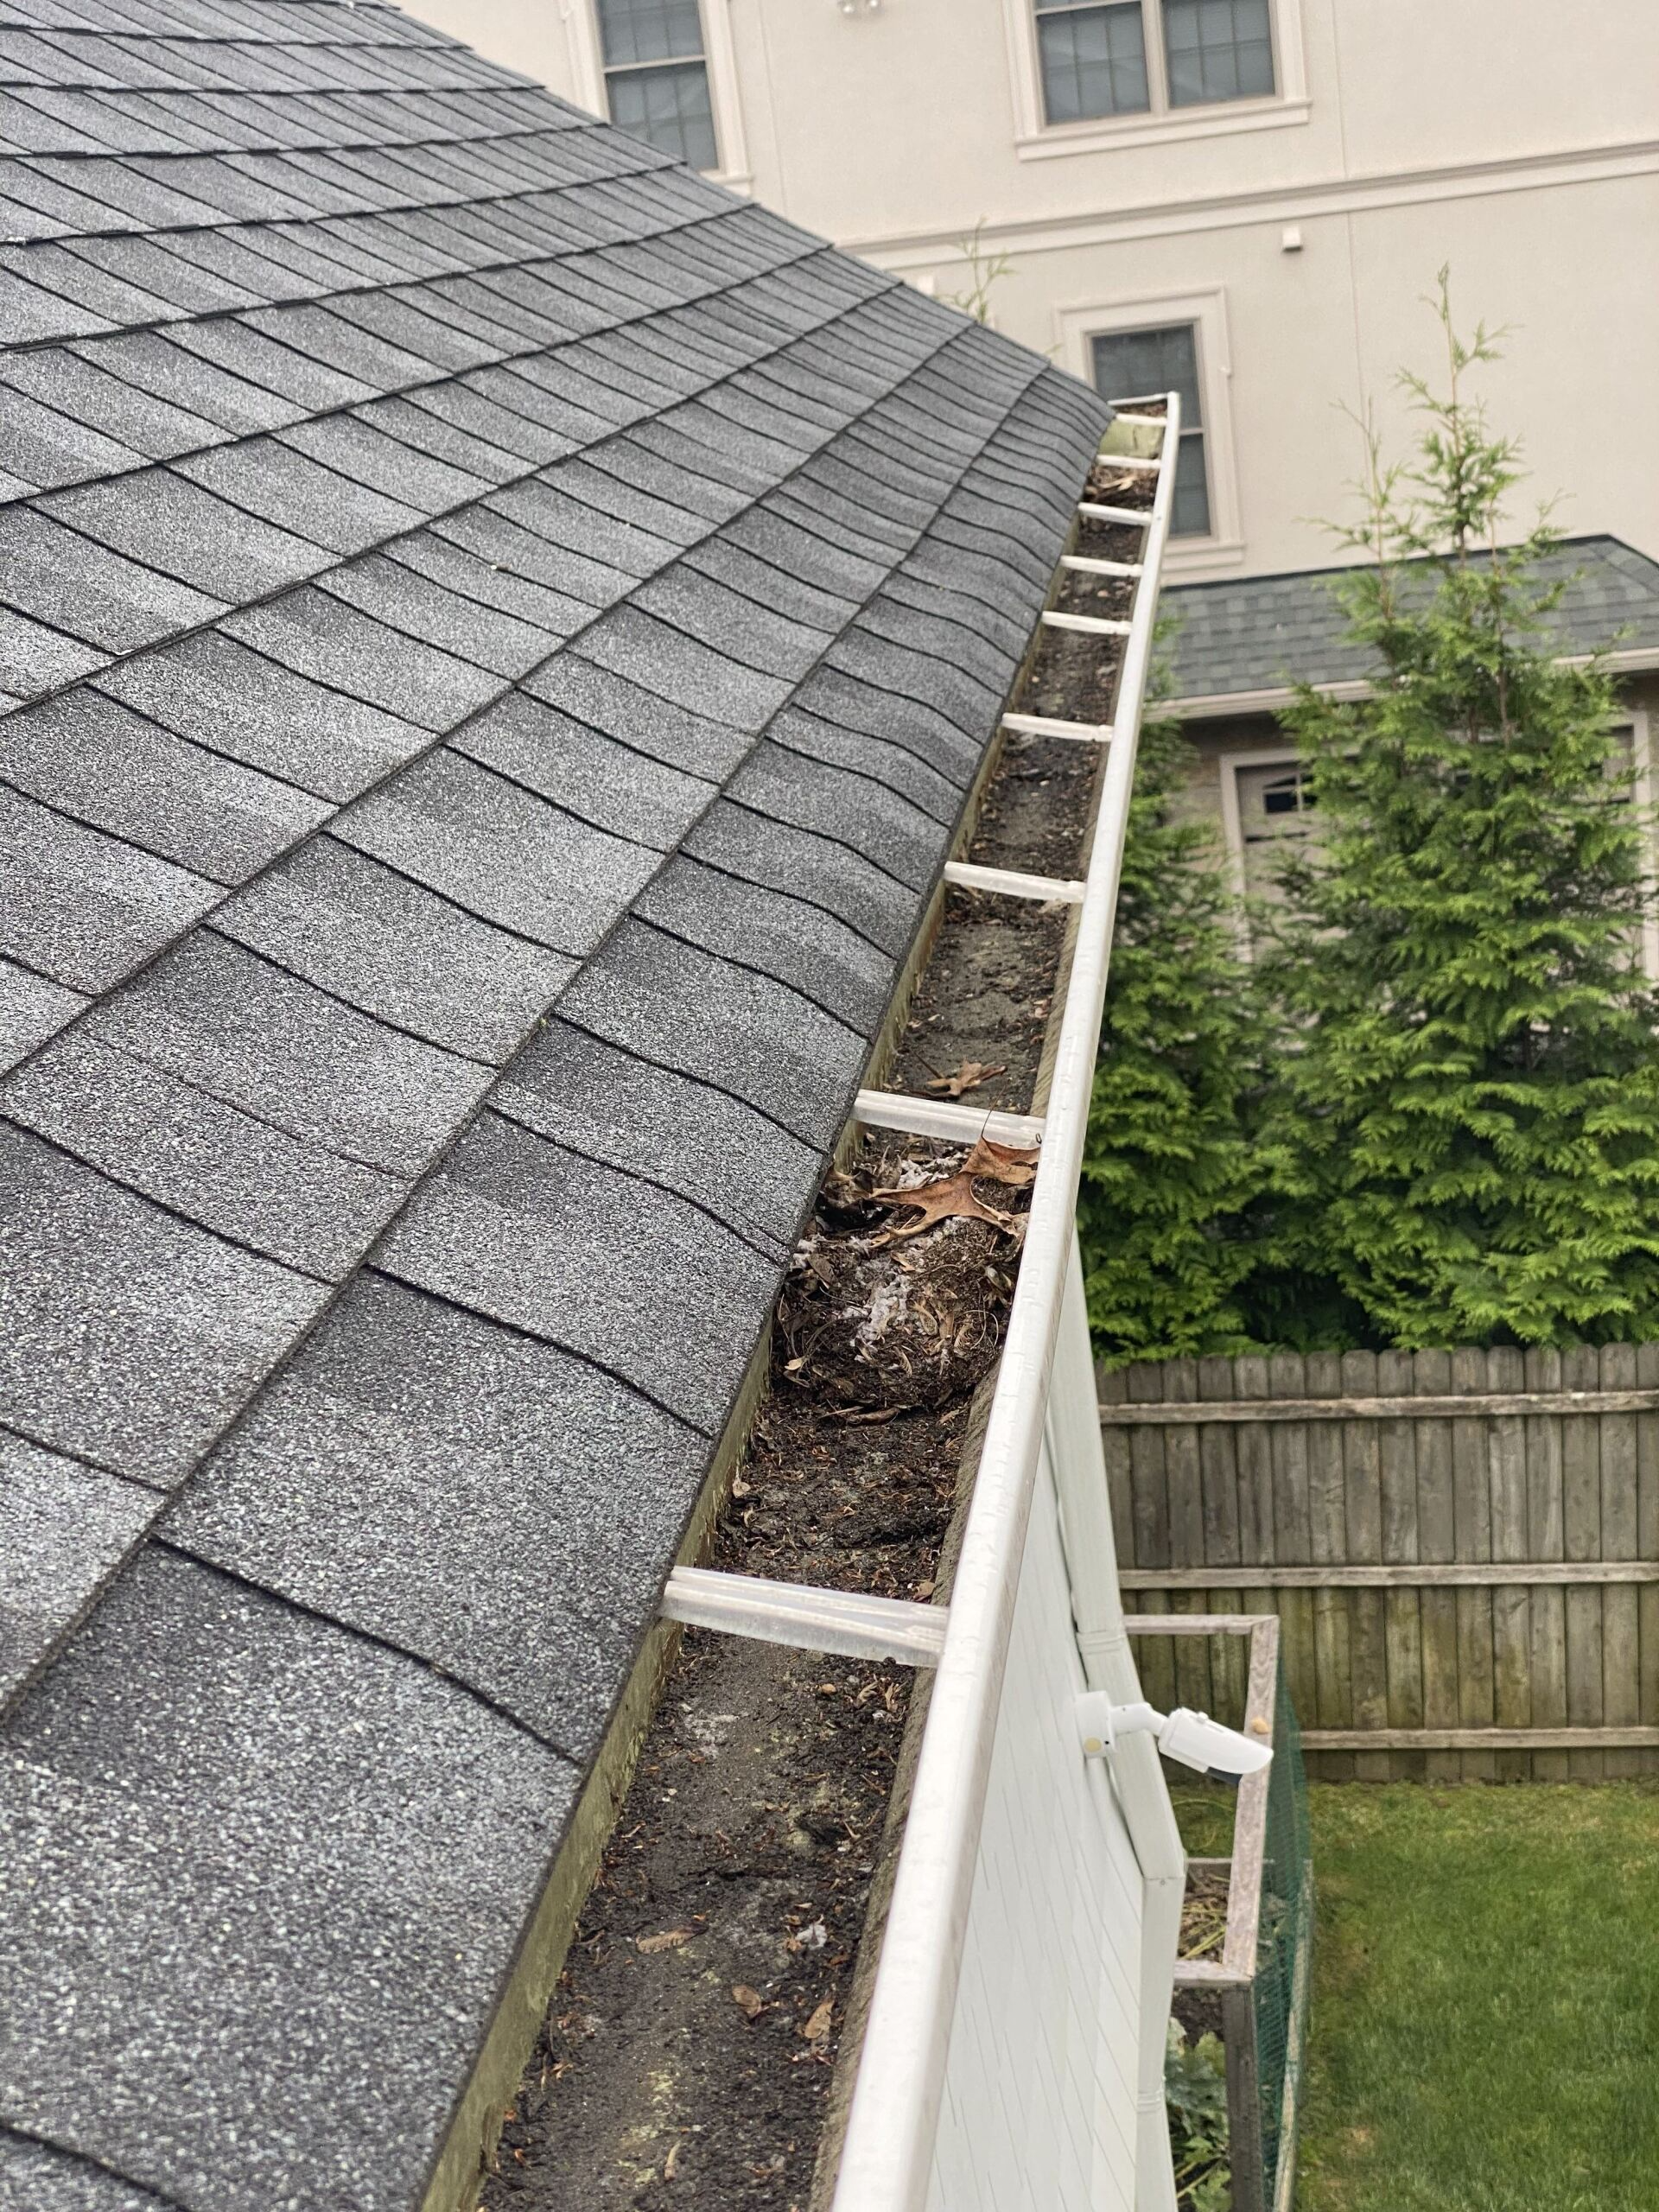 gutter cleaning company, local gutter cleaning company, gutter cleaning company near me